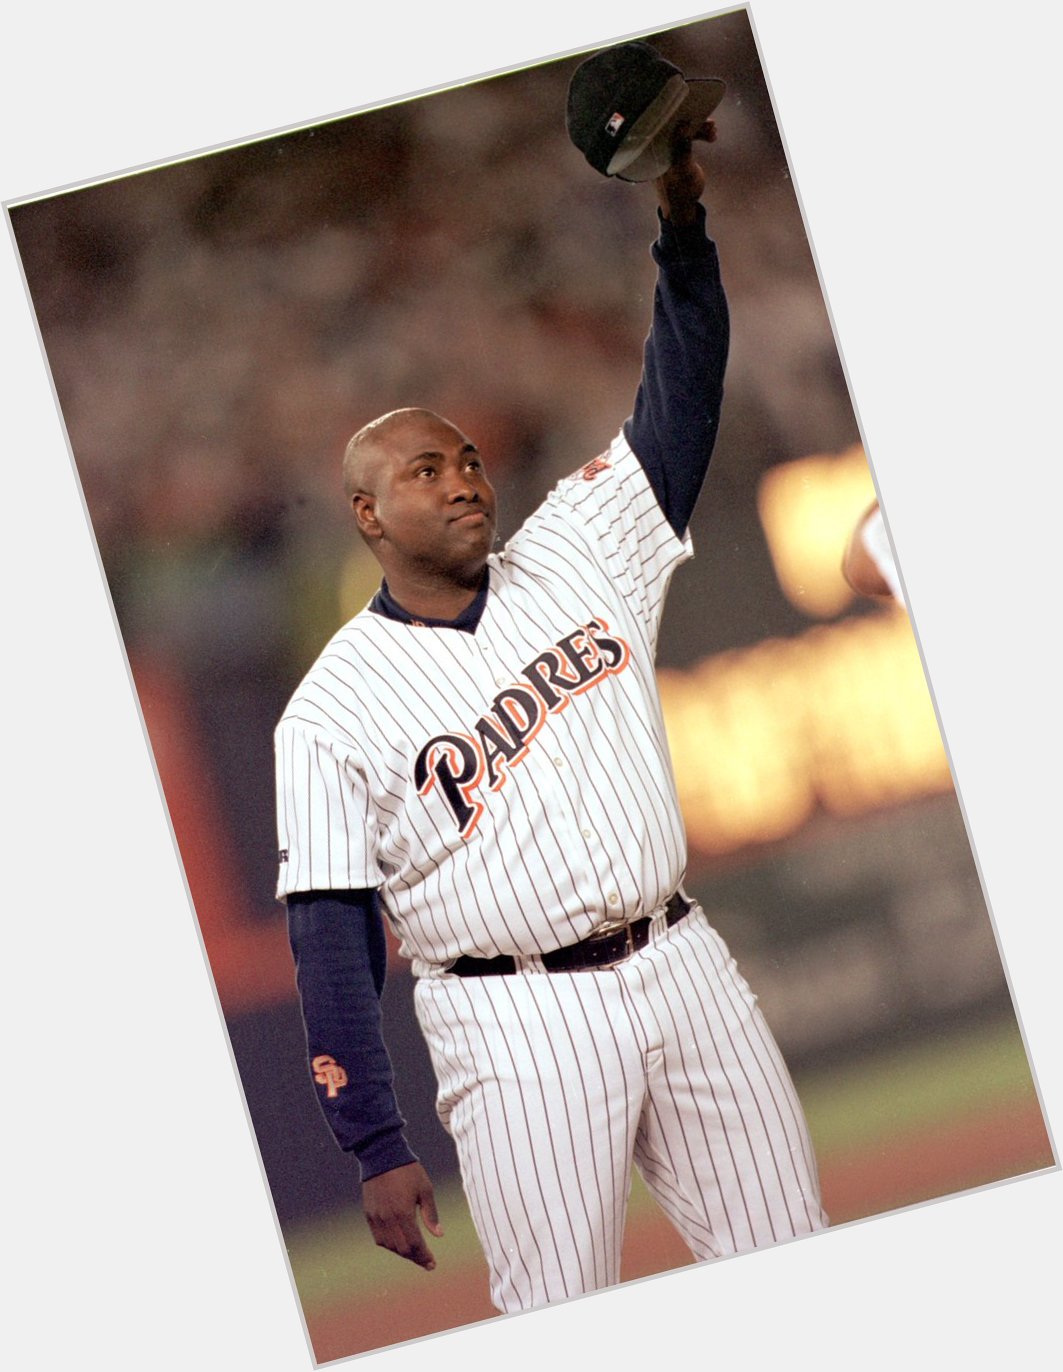 Happy Birthday to the best Padres player of all time, Tony Gwynn!  